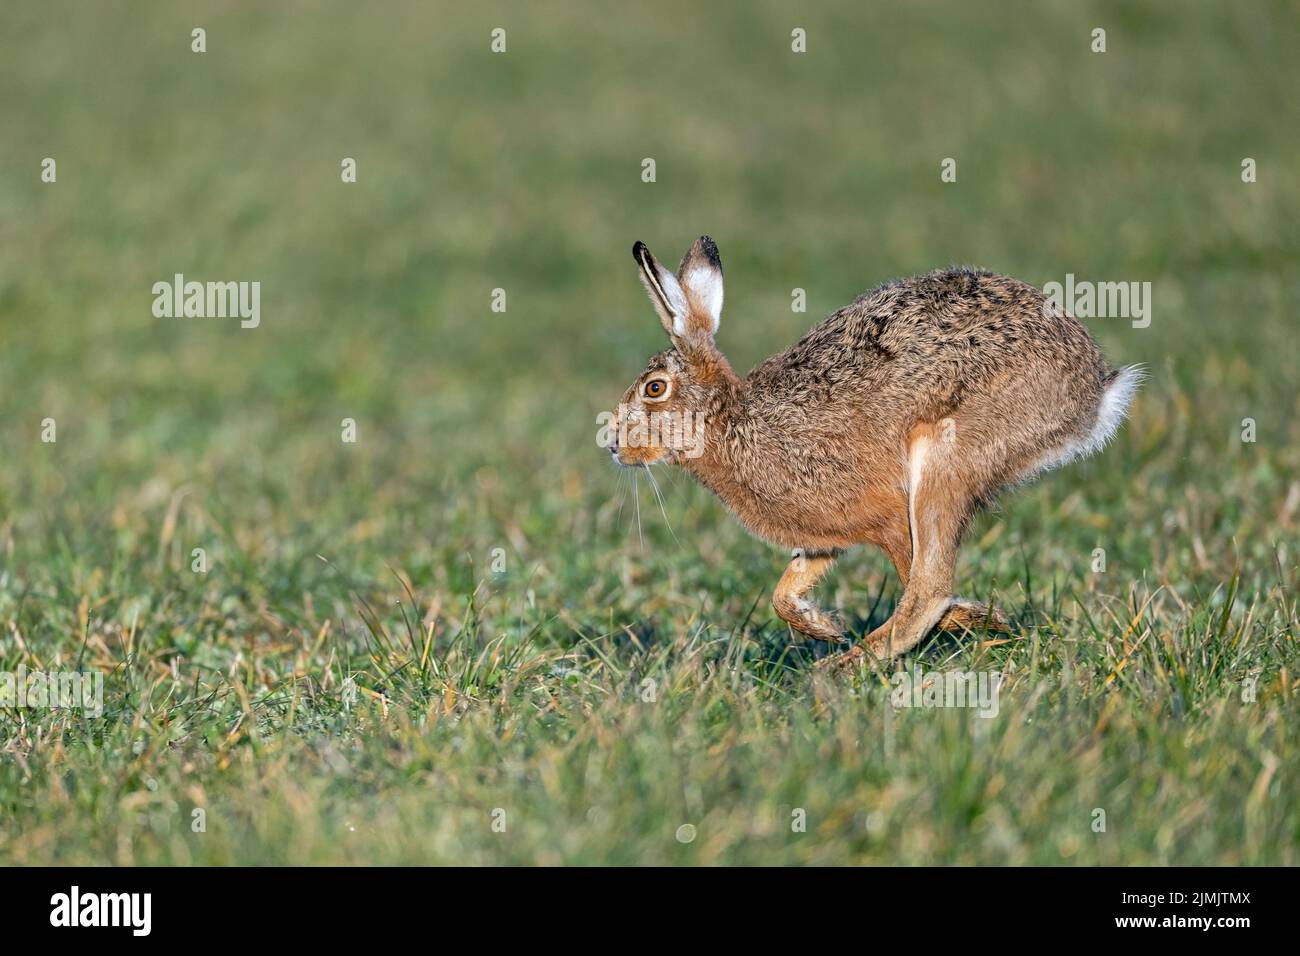 Zielstrebig hoppelt ein maennlicher Feldhase in Richtung Haesin / Determinedly scampers a male European Hare in the direction of a female / Lepus euro Stock Photo